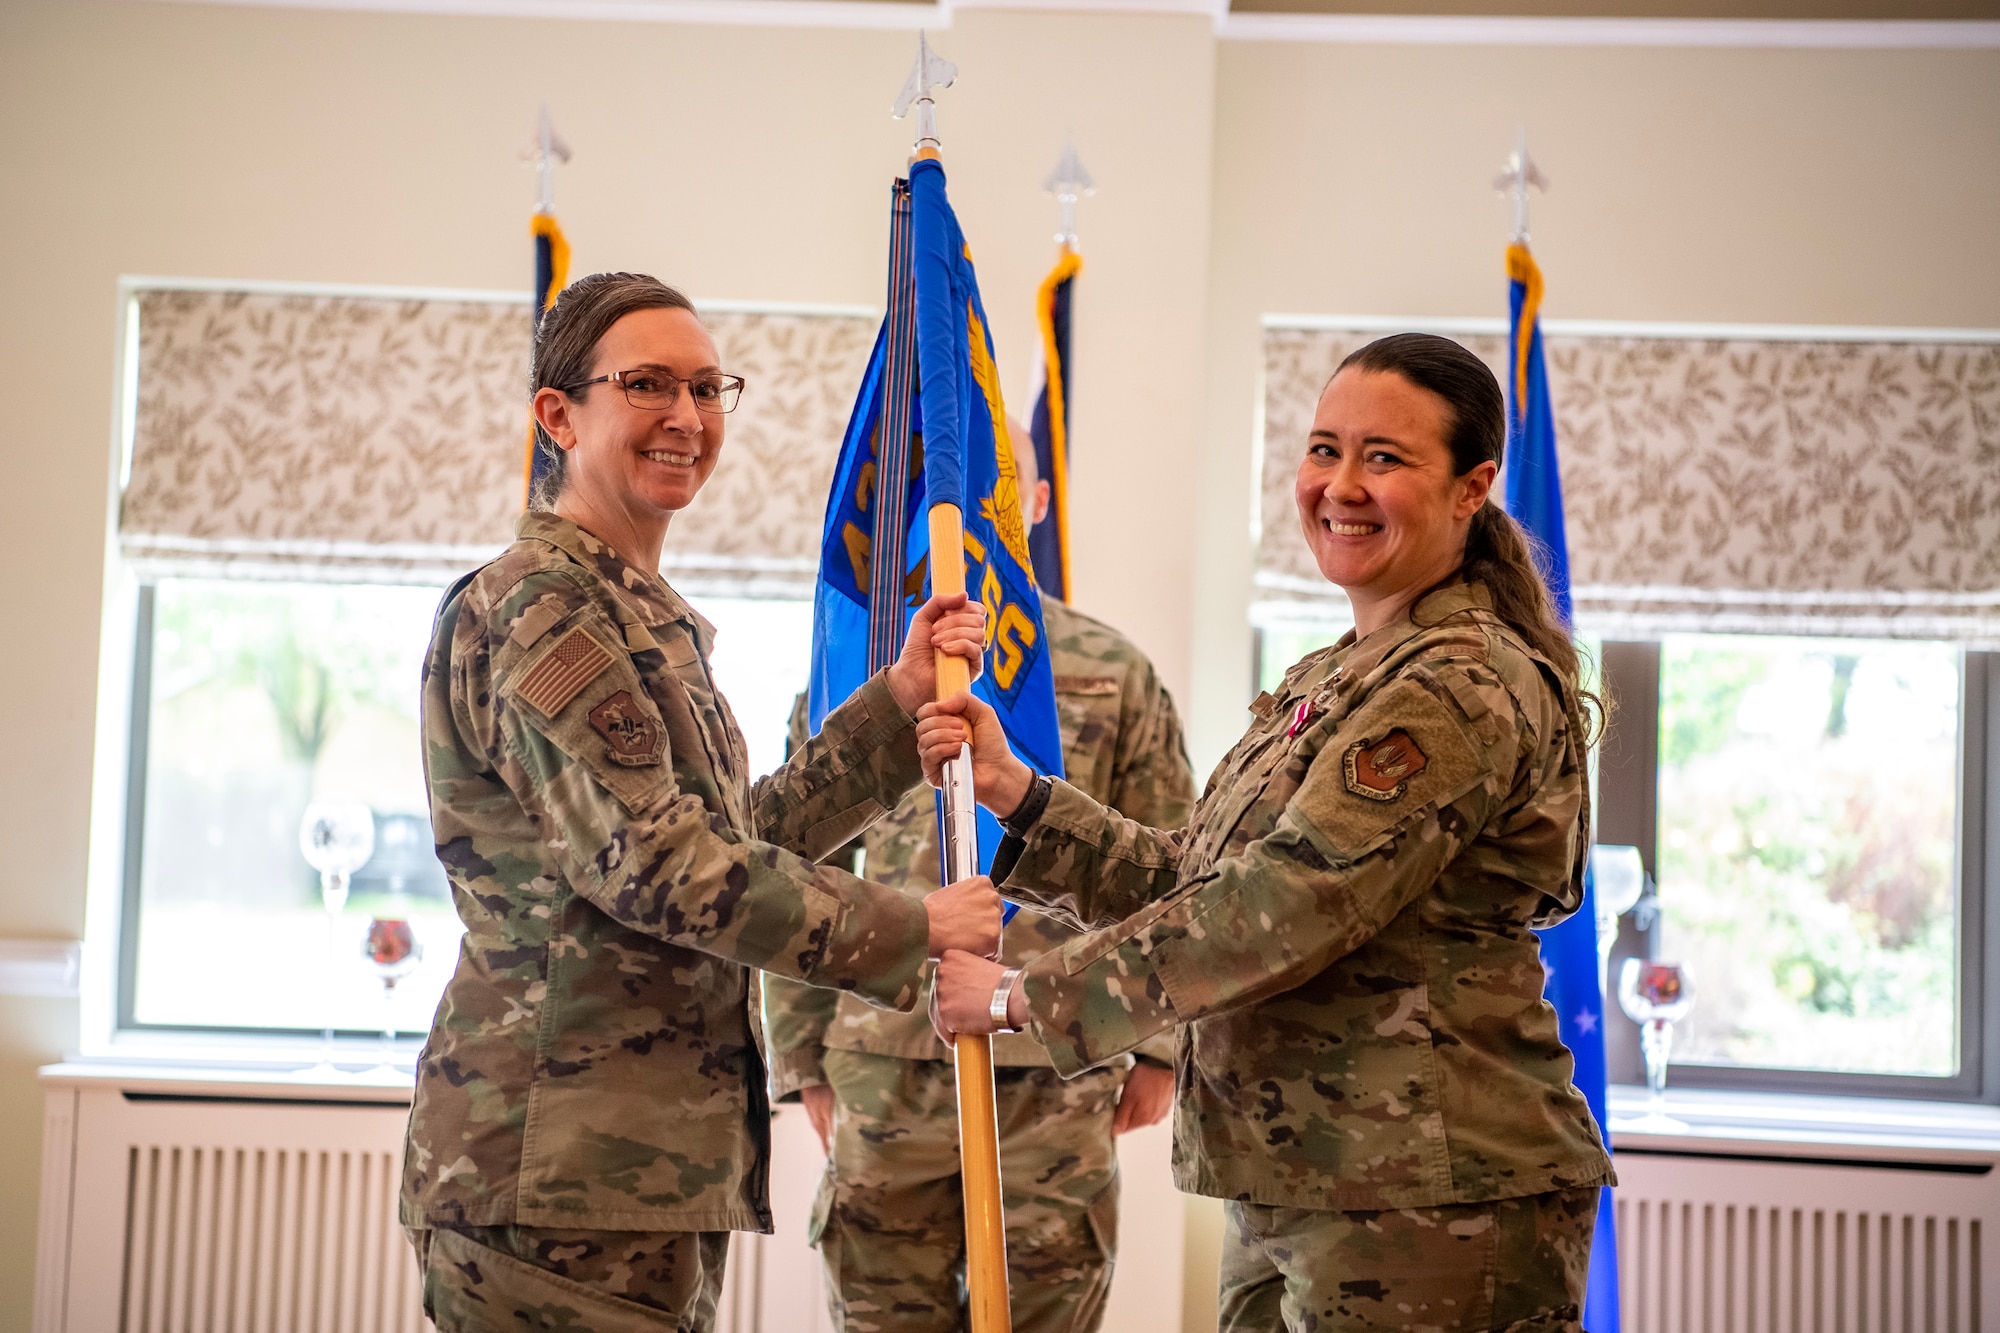 U.S. Air Force Col. Valarie Long, left, 423d Air Base Group commander, receives the 423d Force Support Squadron guidon from Lt. Col. Kirsten Nicholls, 423d FSS outgoing commander, during a change of command ceremony at RAF Alconbury, England, June 5, 2023. During her command, Nicholls implemented quality of life programs for 32 facilities across two installations. Her activities also served 12 joint force and multi-national mission partners. (U.S. Air Force photo by Staff Sgt. Eugene Oliver)